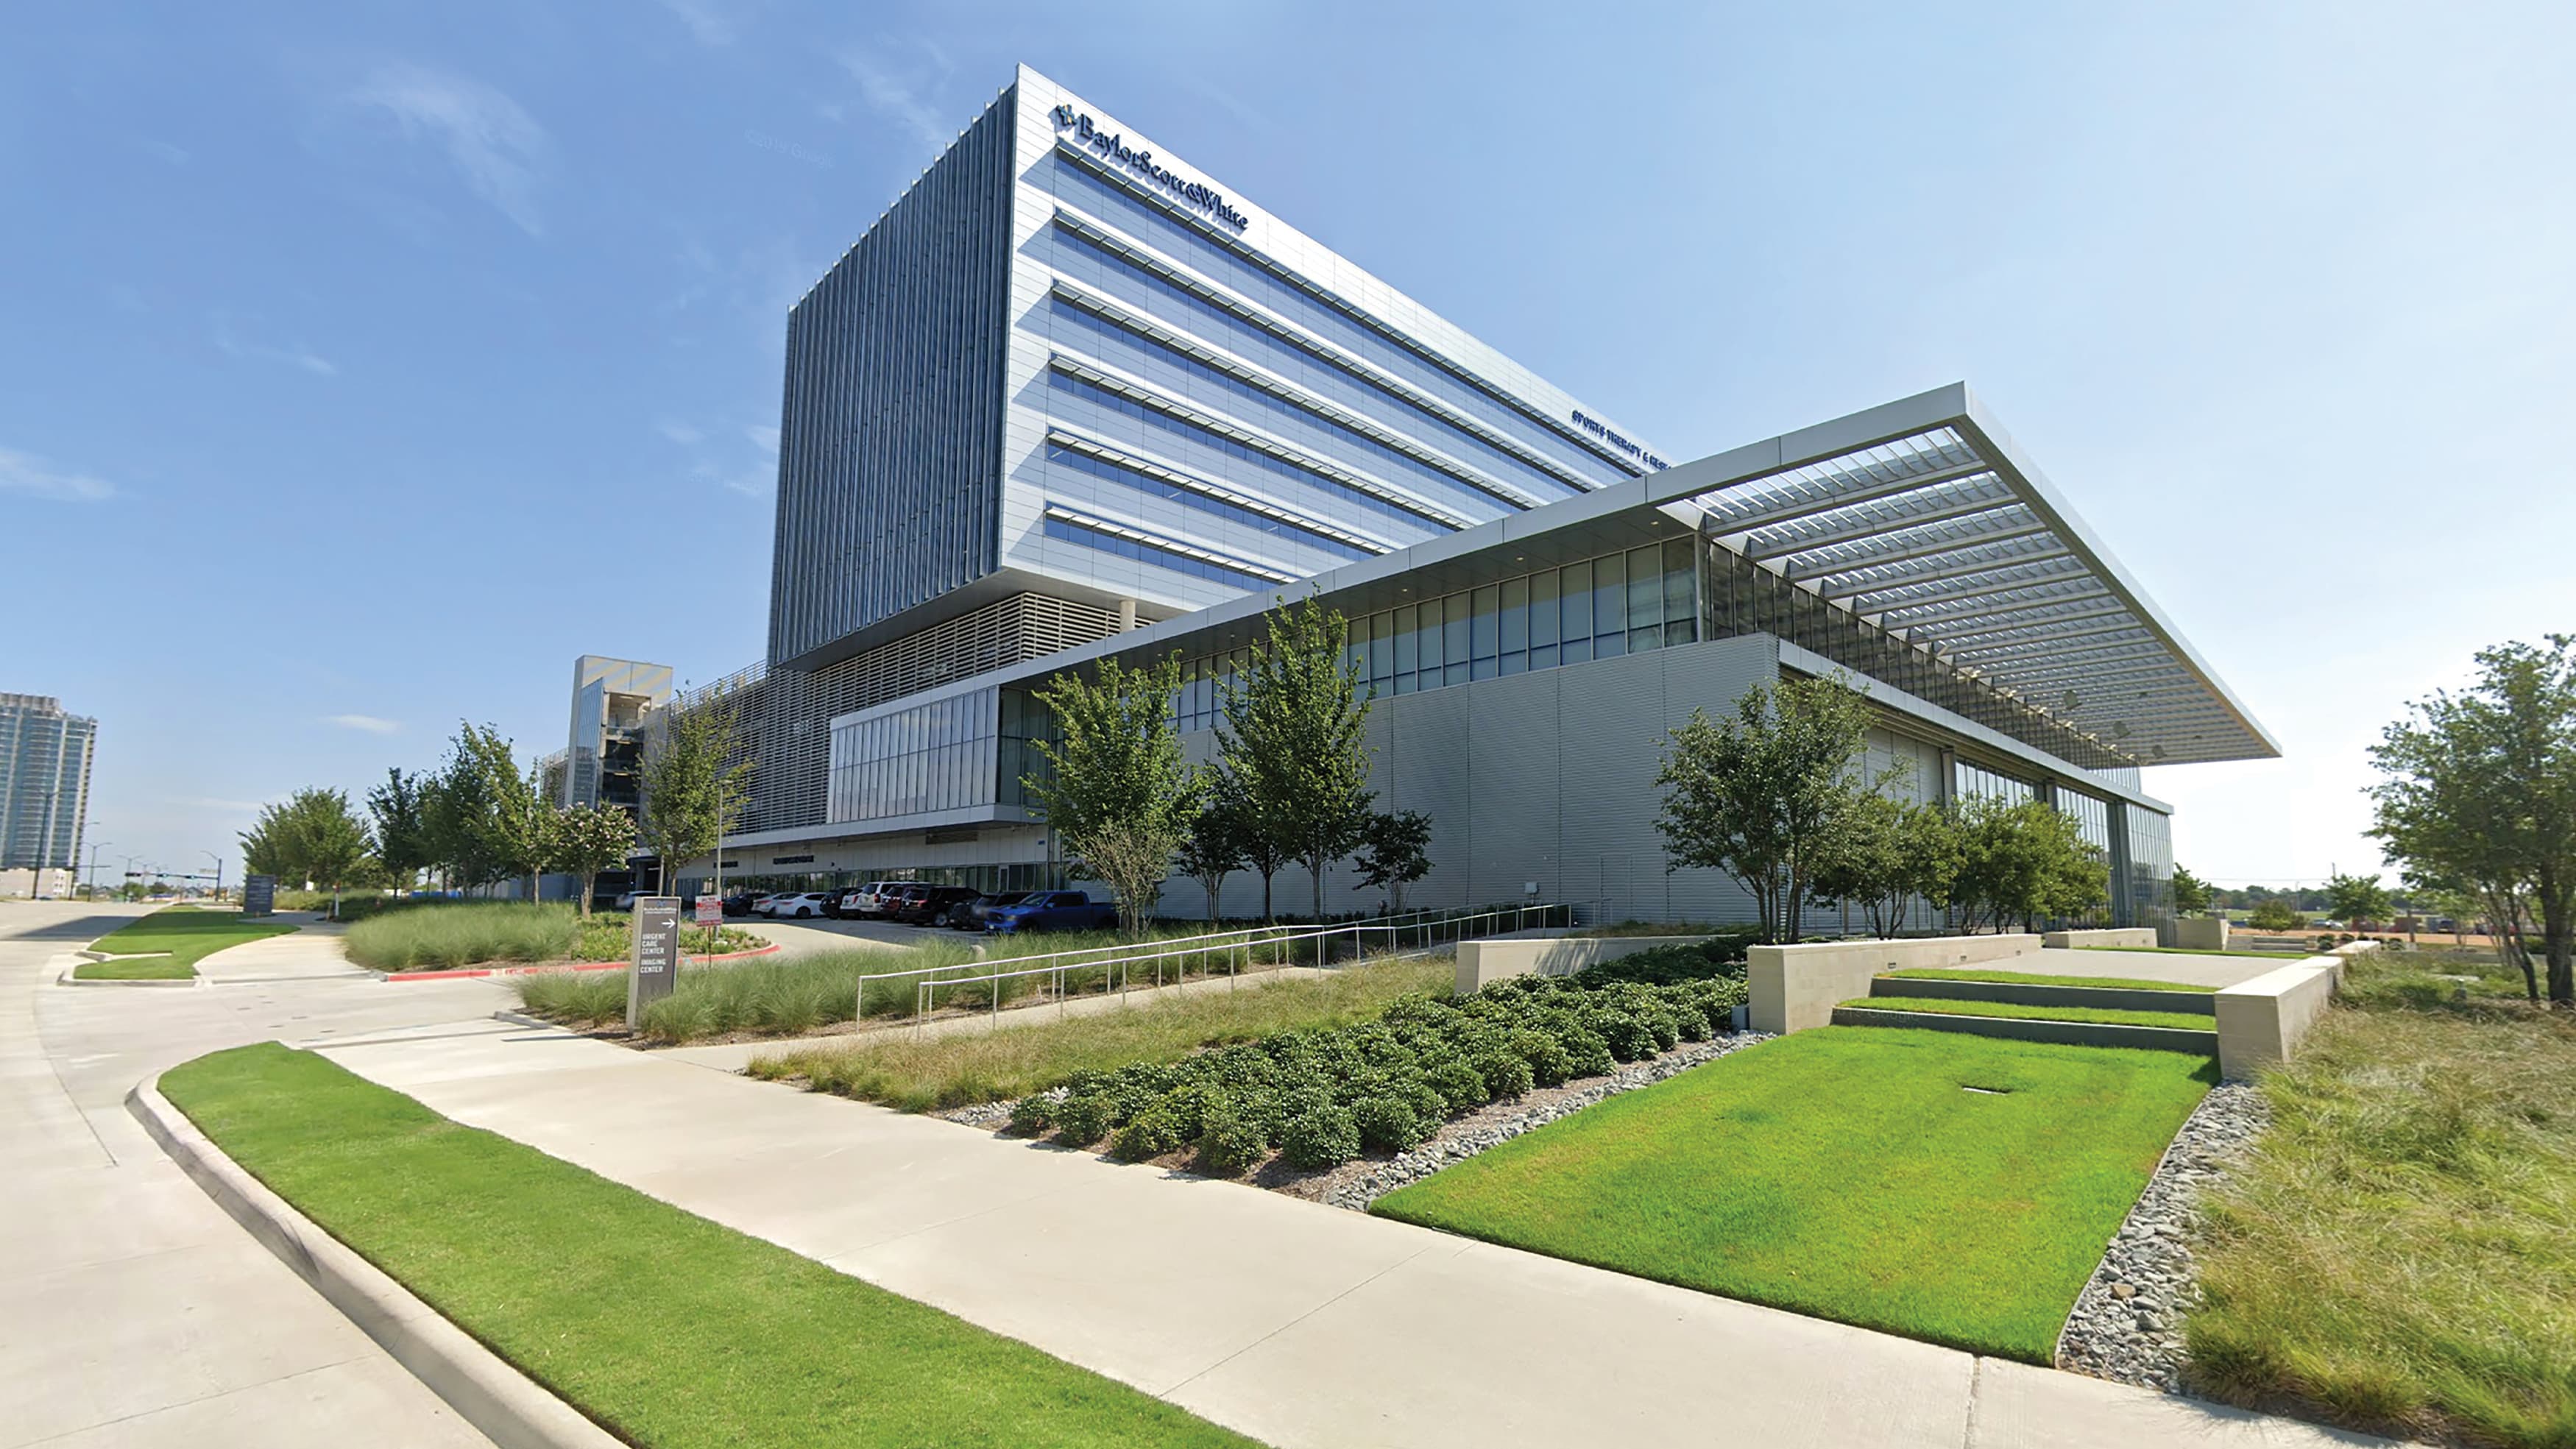 An exterior photograph of the Baylor Scott & White Sports Therapy & Research building at The Star in Frisco, Texas.